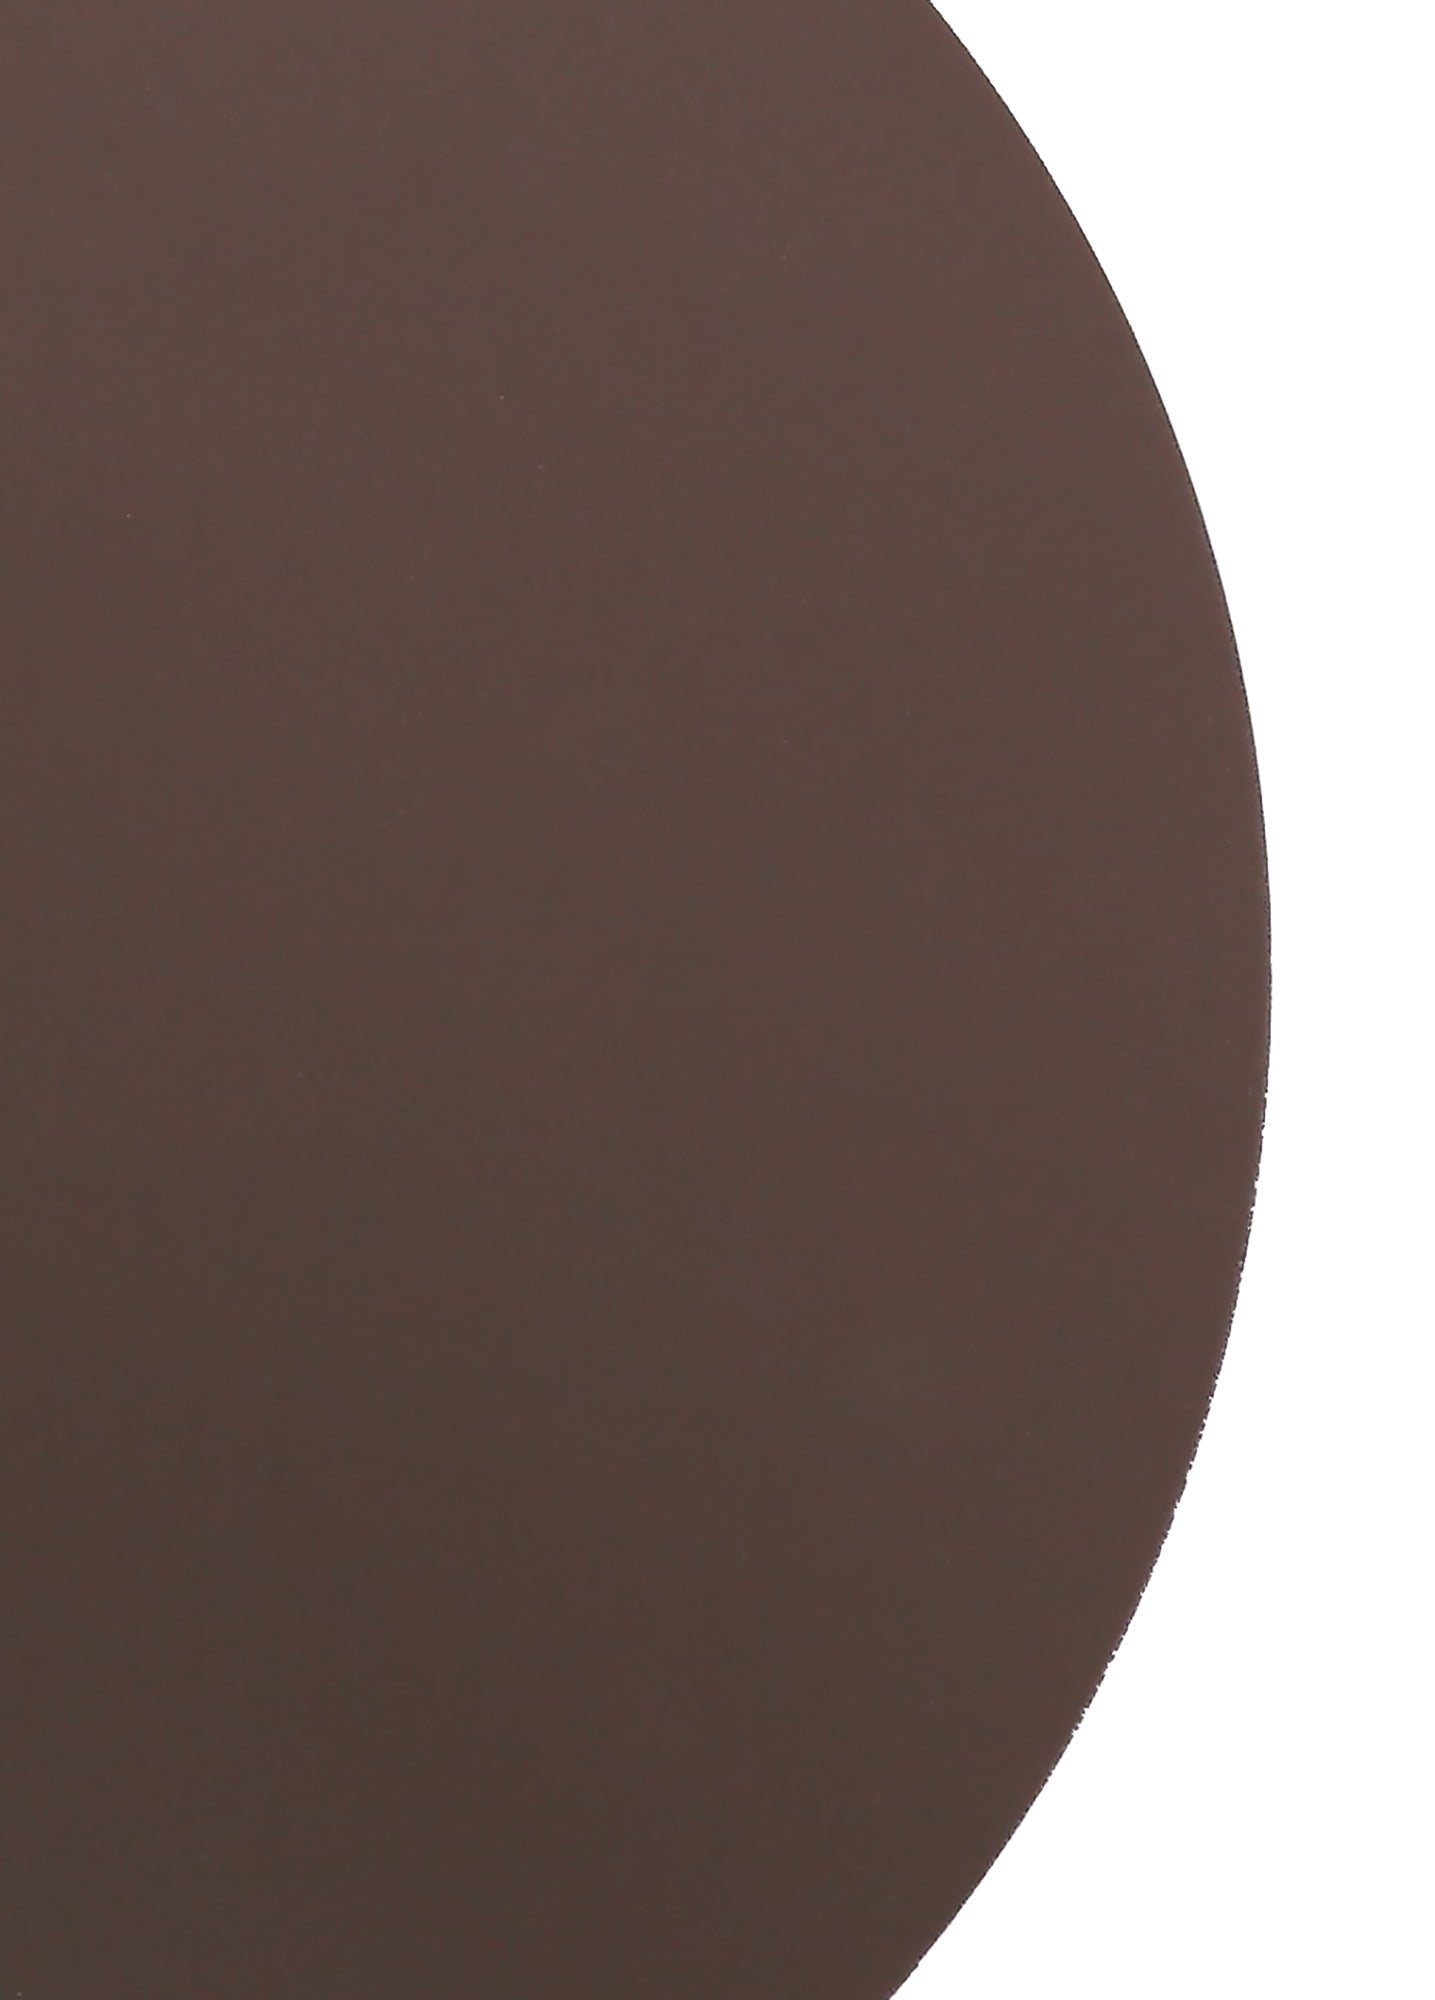 Modus 200mm Non-Electric Round Plate, Coffee